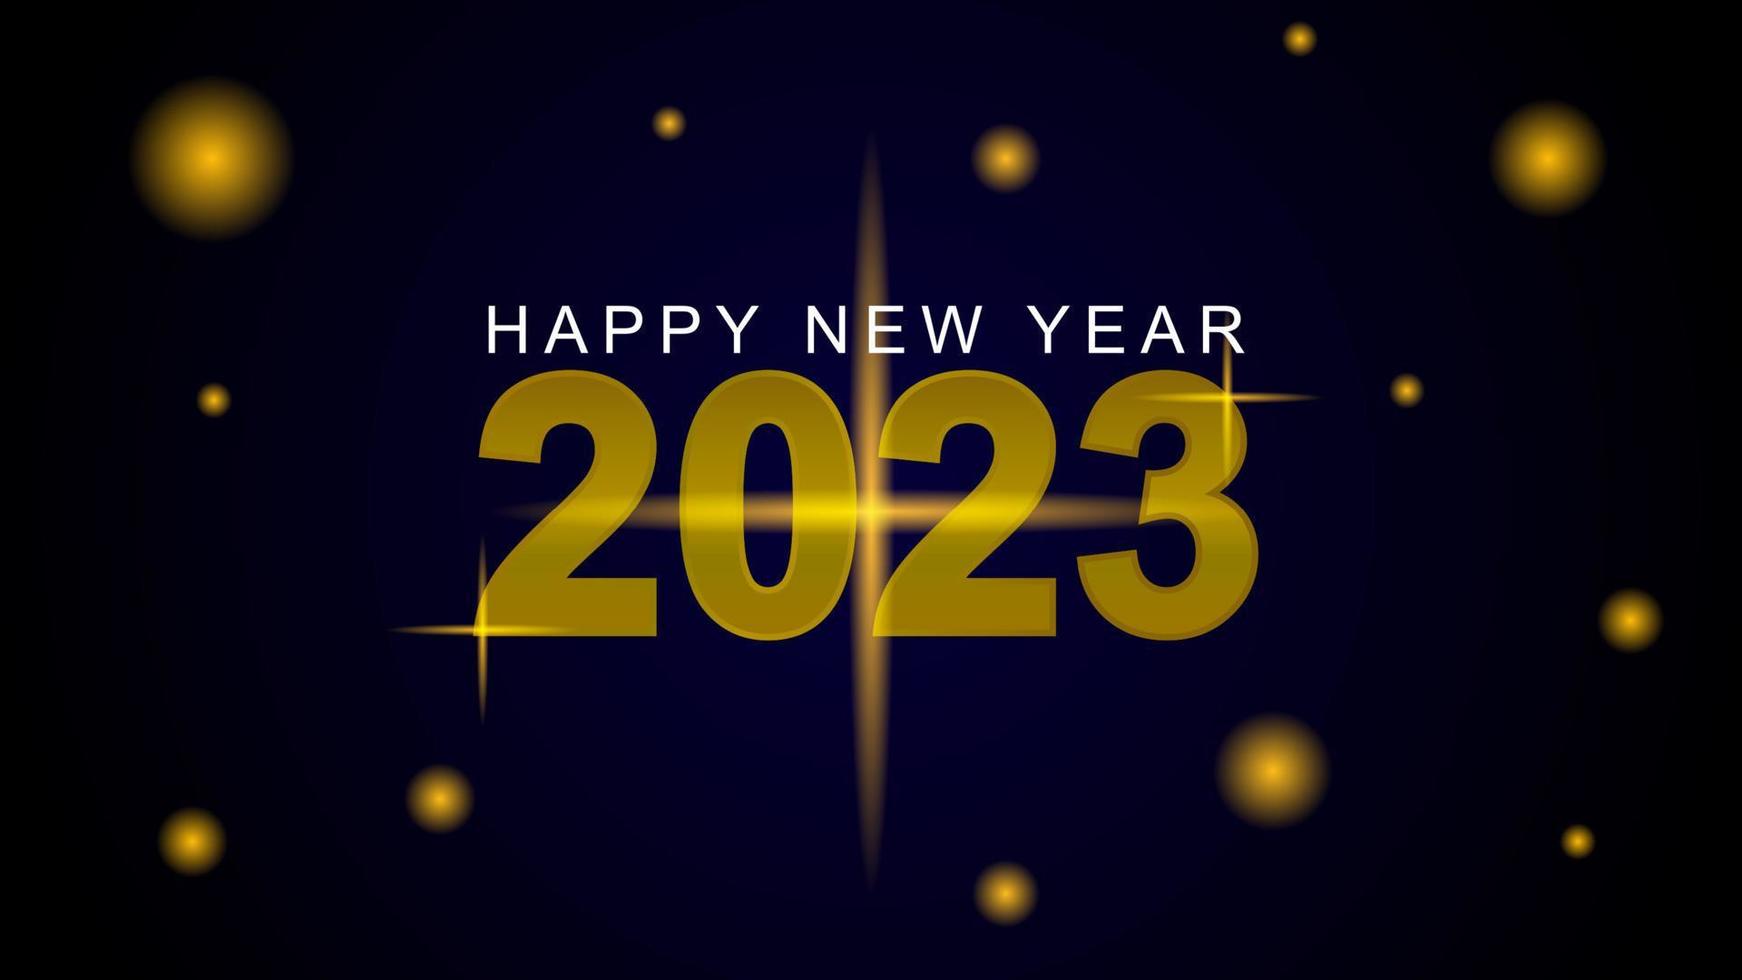 Happy New Year 2023 Greeting card design and social media post vector